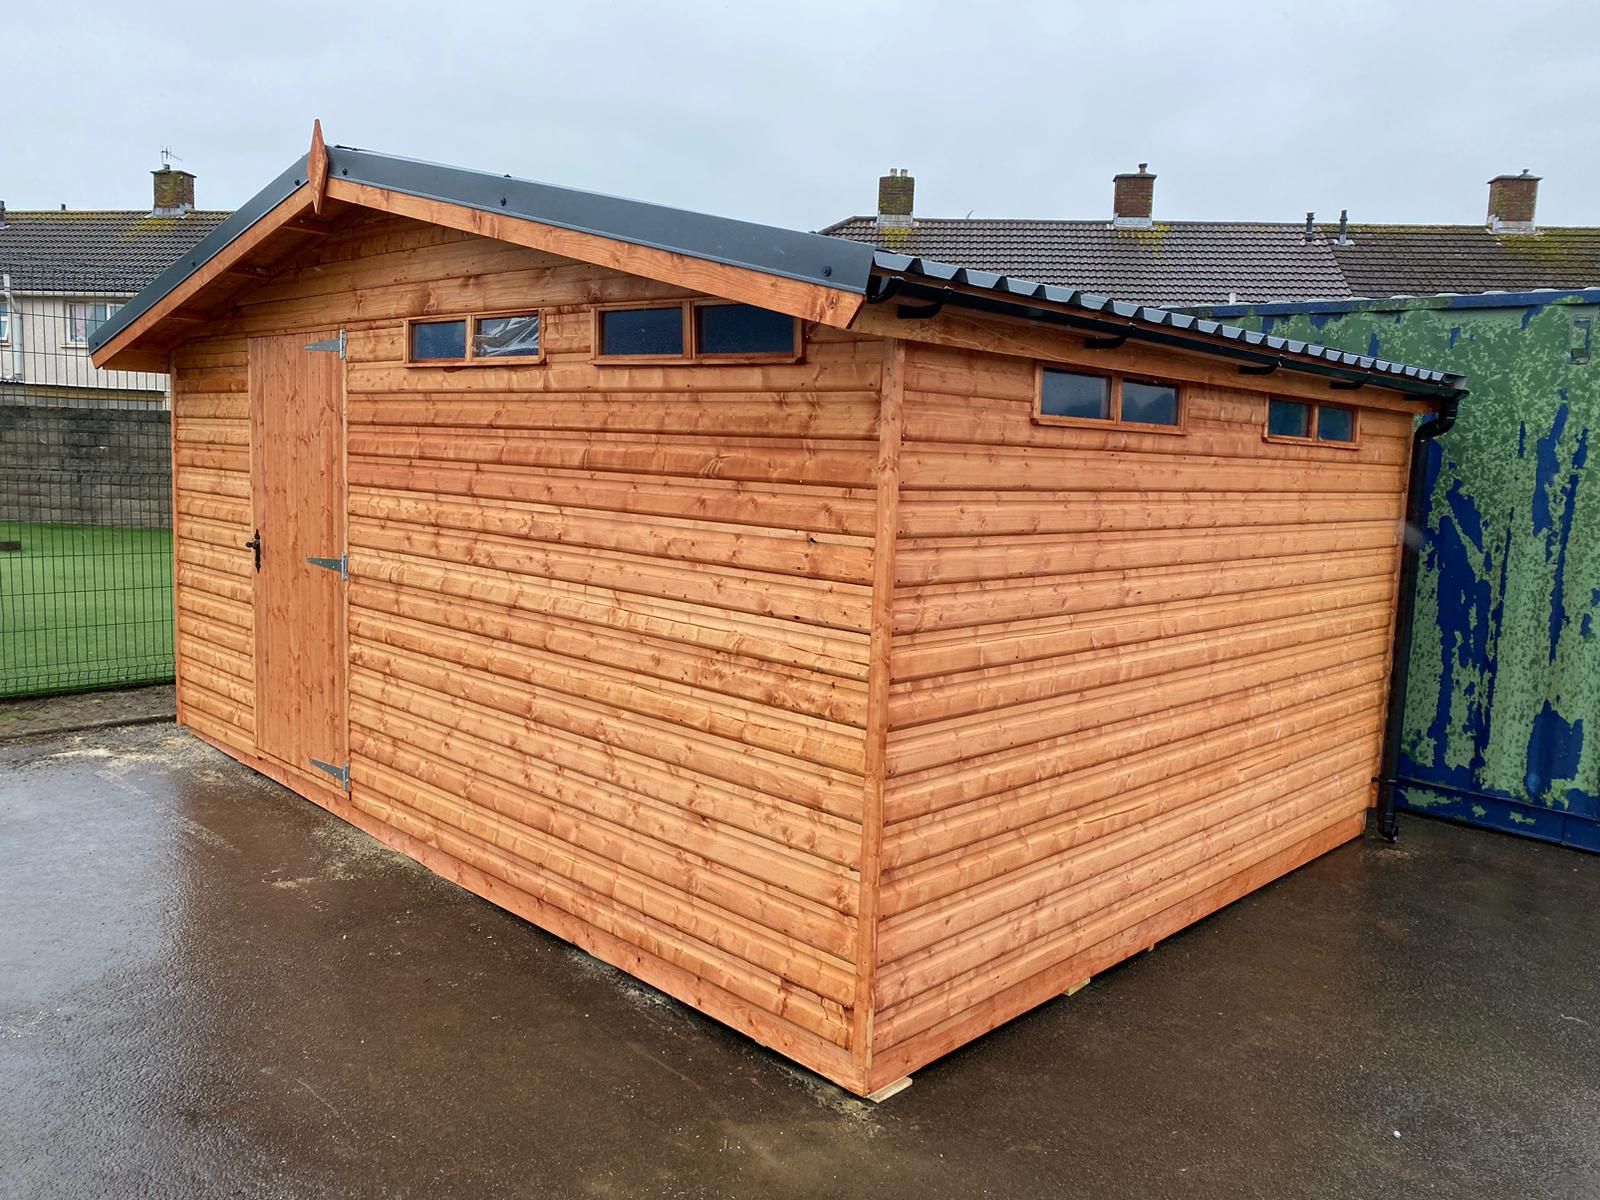 Storage shed with security windows. Metal Box profile roof sheets.